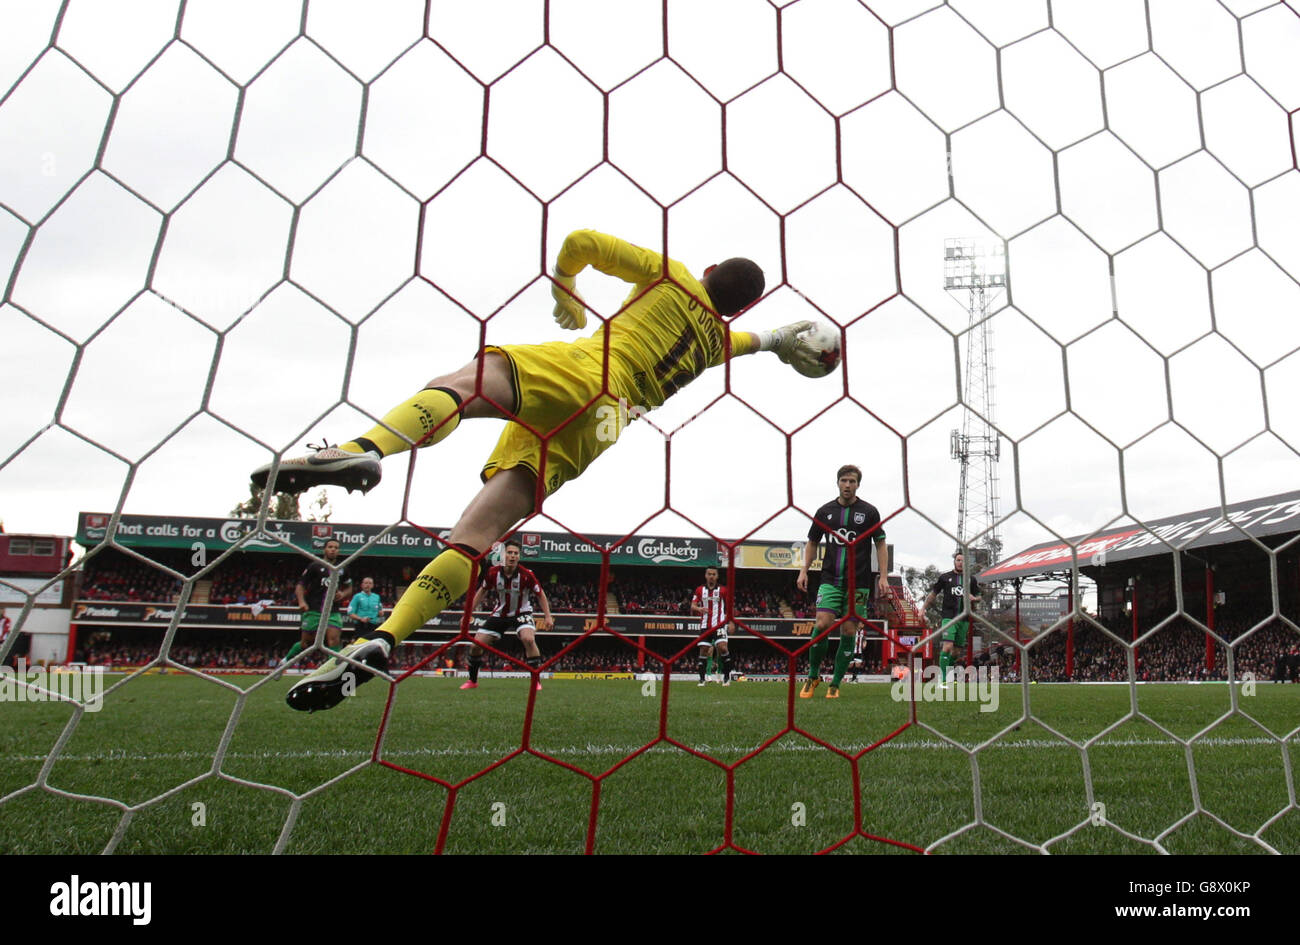 Bristol City goalkeeper Richard O'Donnell makes a save during their Sky Bet Championship football match, at Griffin Park in London. EMPICS Photo. Picture date: Saturday April 16, 2016. Photo credit should read: Yui Mok/Empics Stock Photo